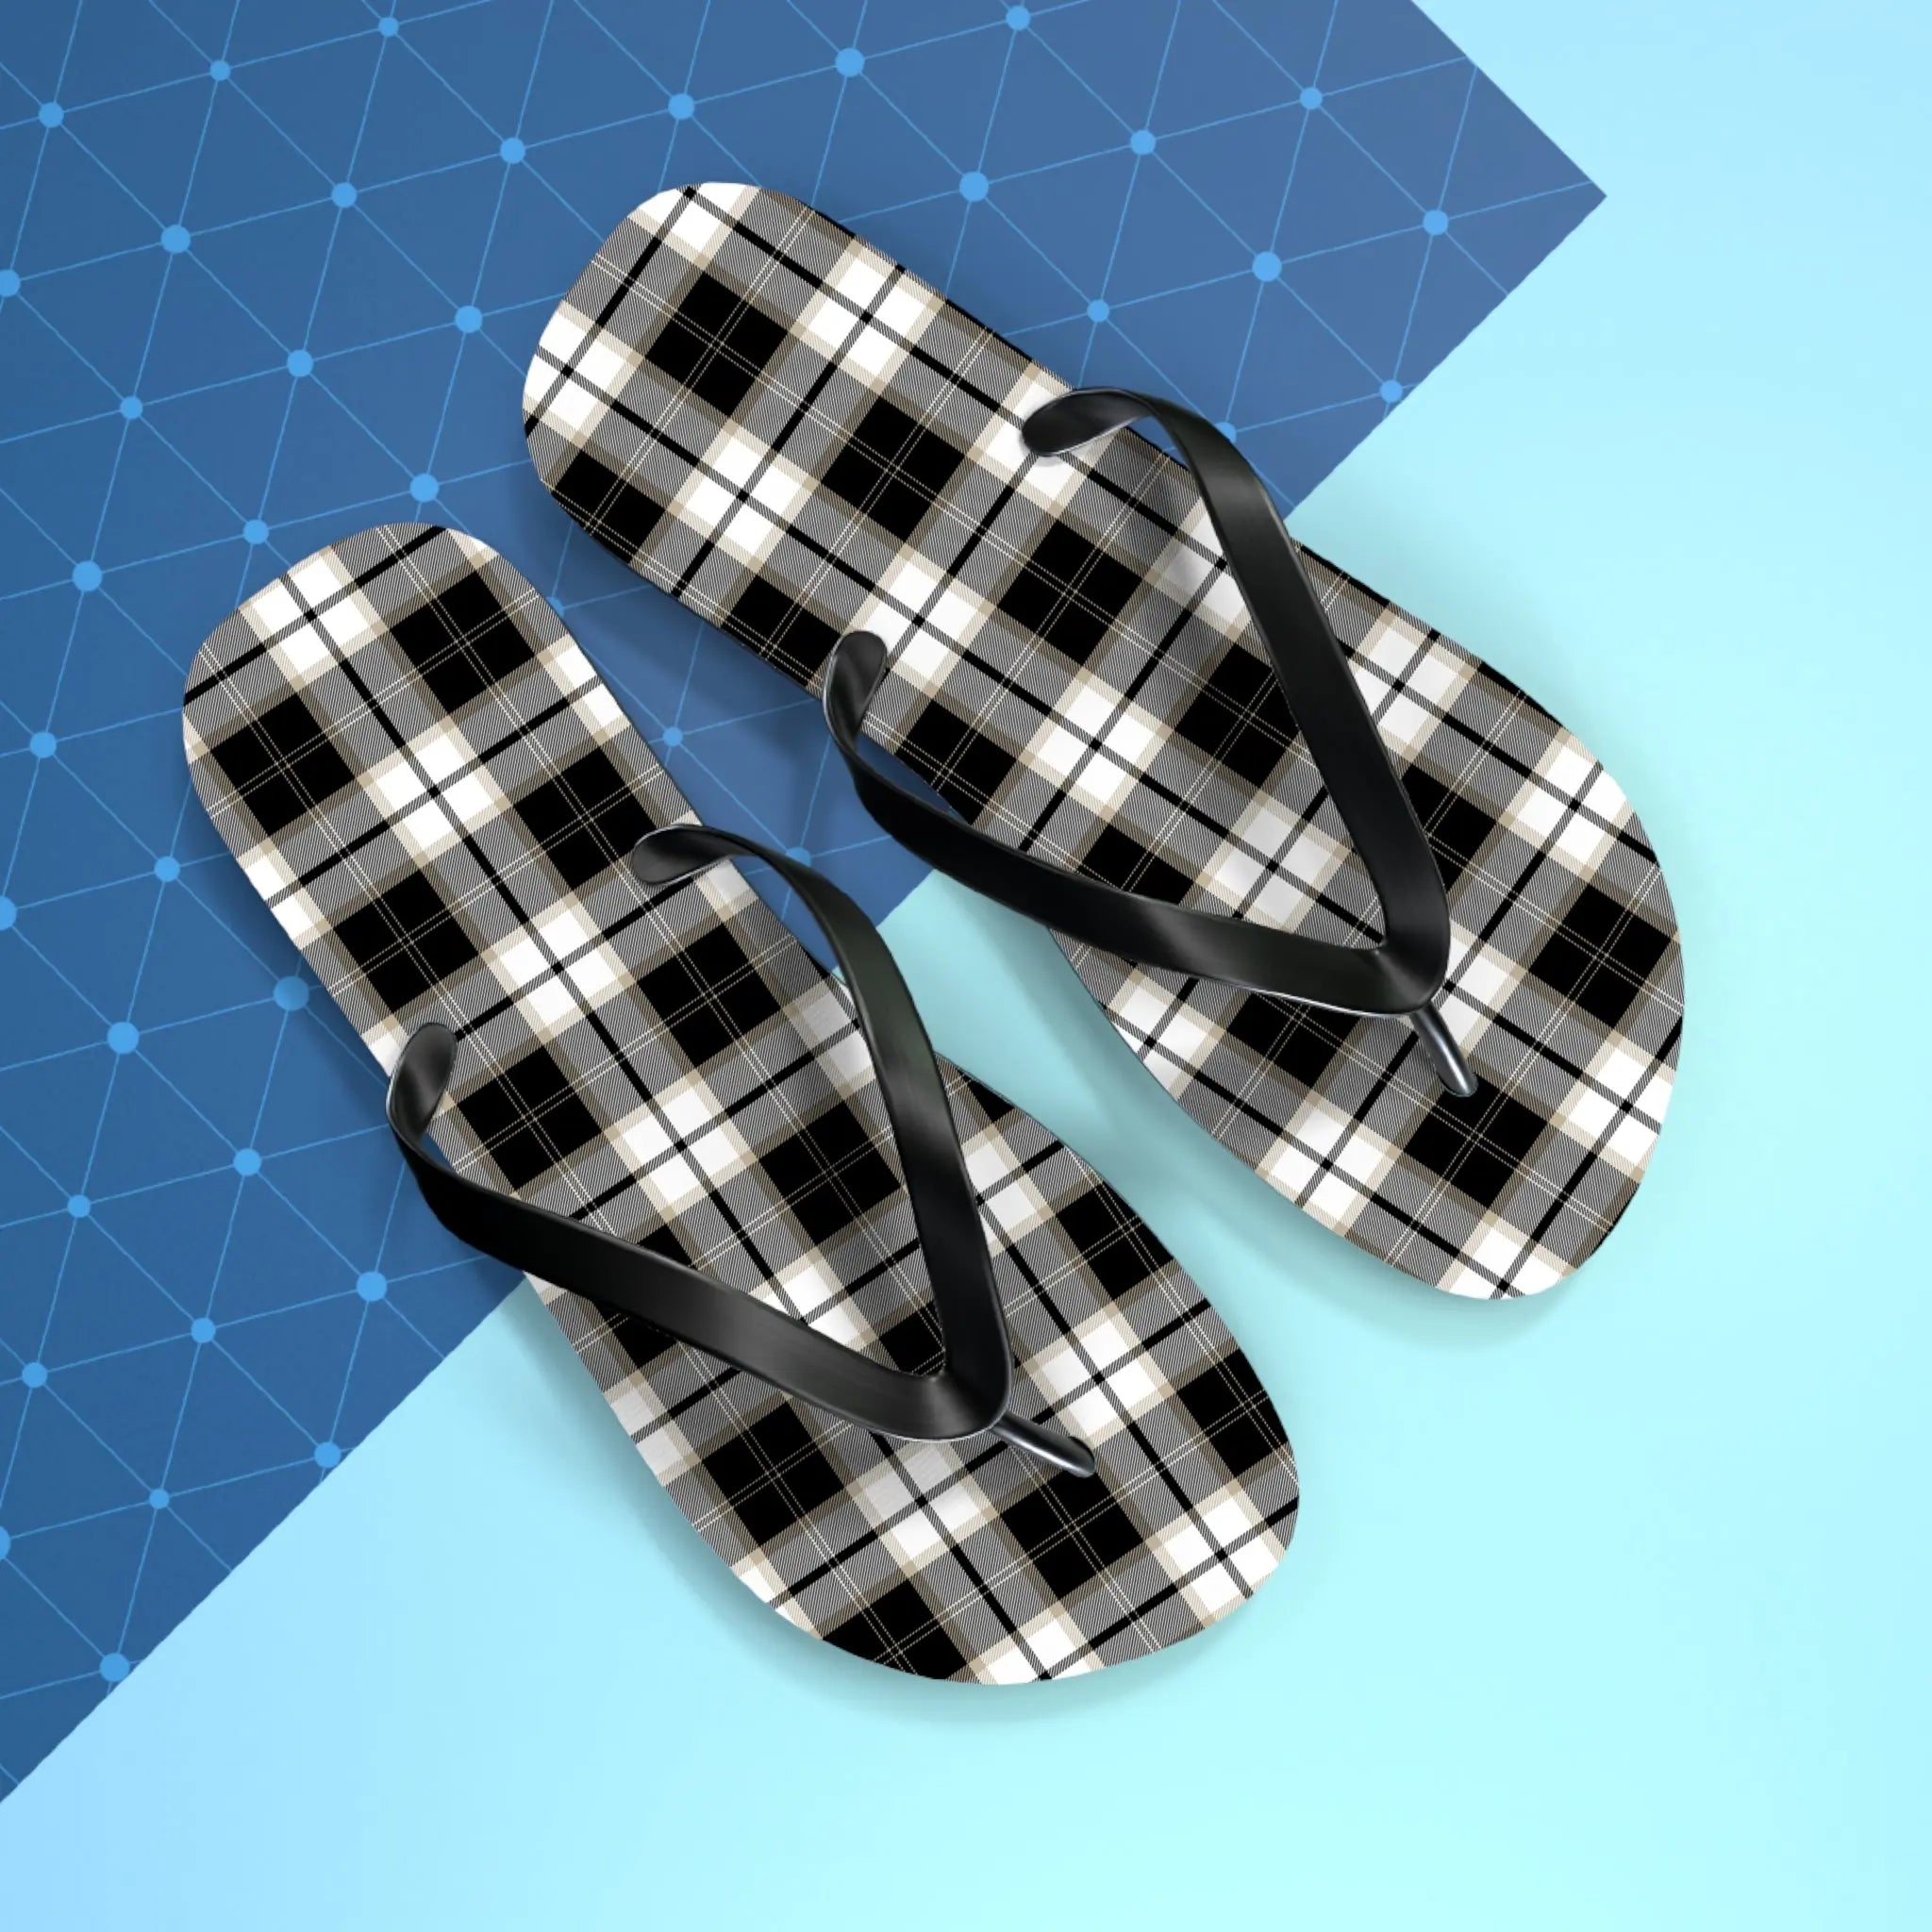  Groove Collection Black and White Plaid Flip Flops Shoes